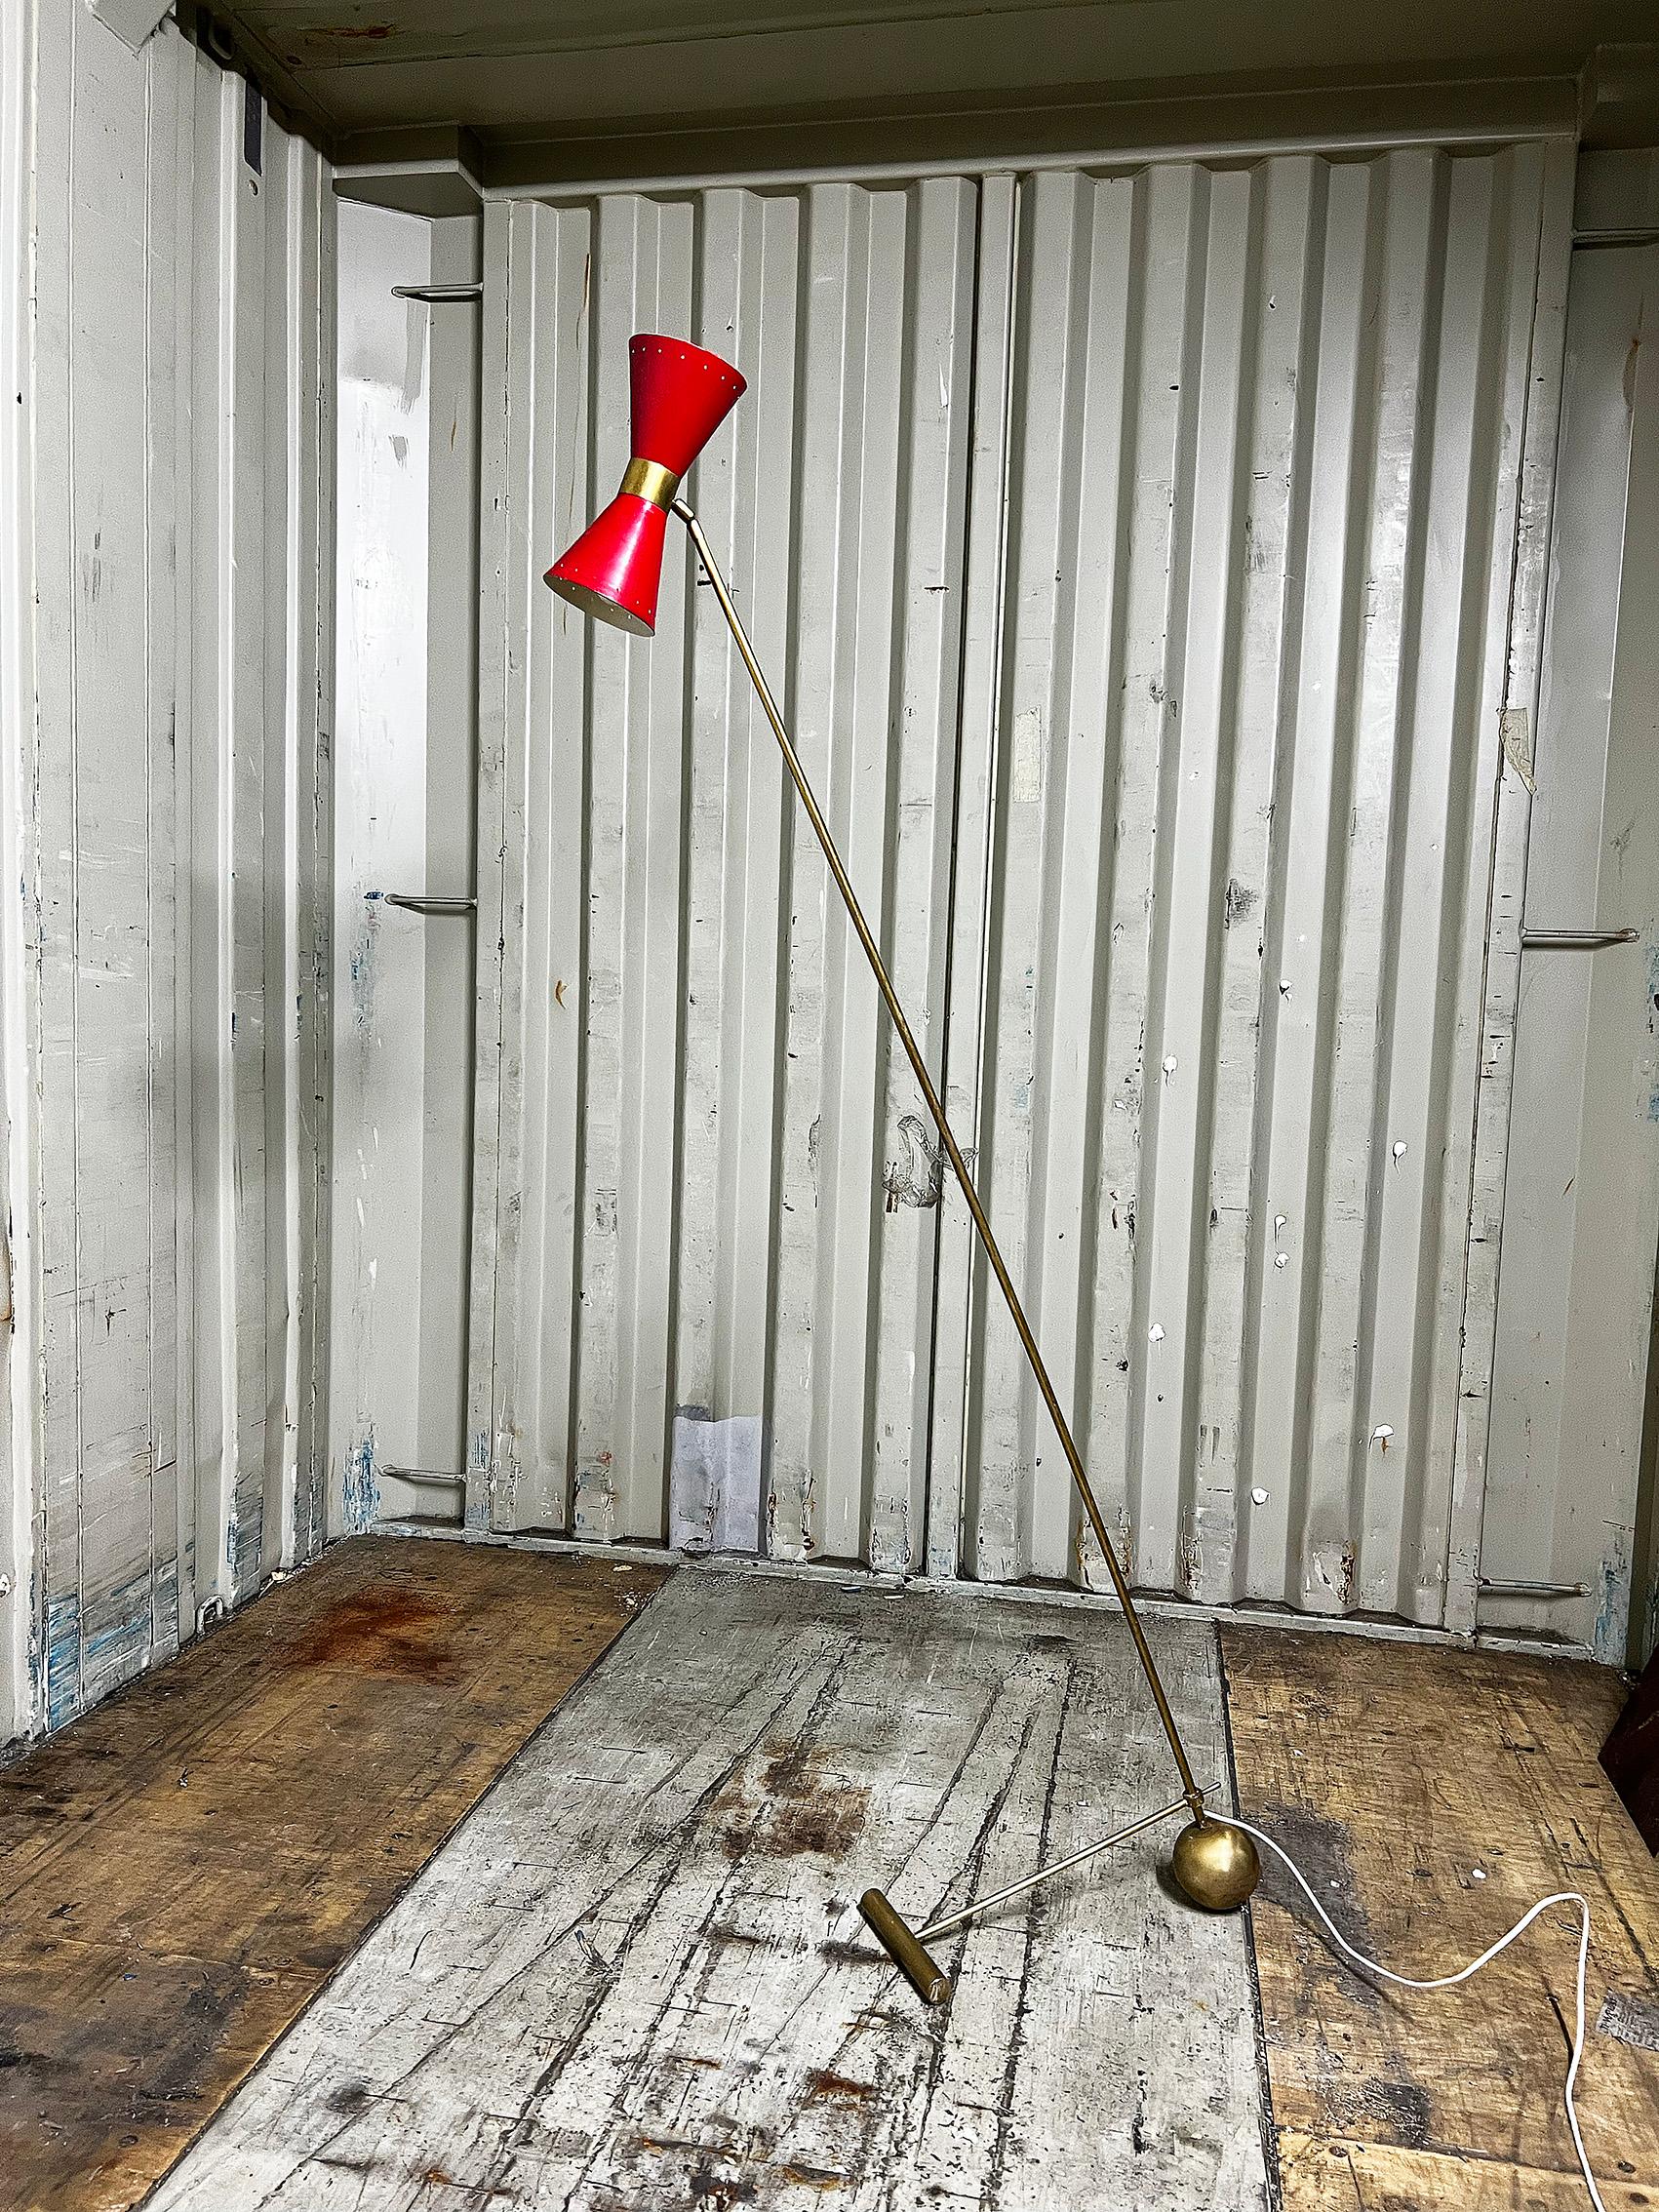 Italian counterweight floor lamp with a red lacquered shade, can be turned in all directions. This floor lamp has been designed with two weights adjuster at base that allows the leaning angle to be increased or decreased. The lamp has 2 sockets, 1